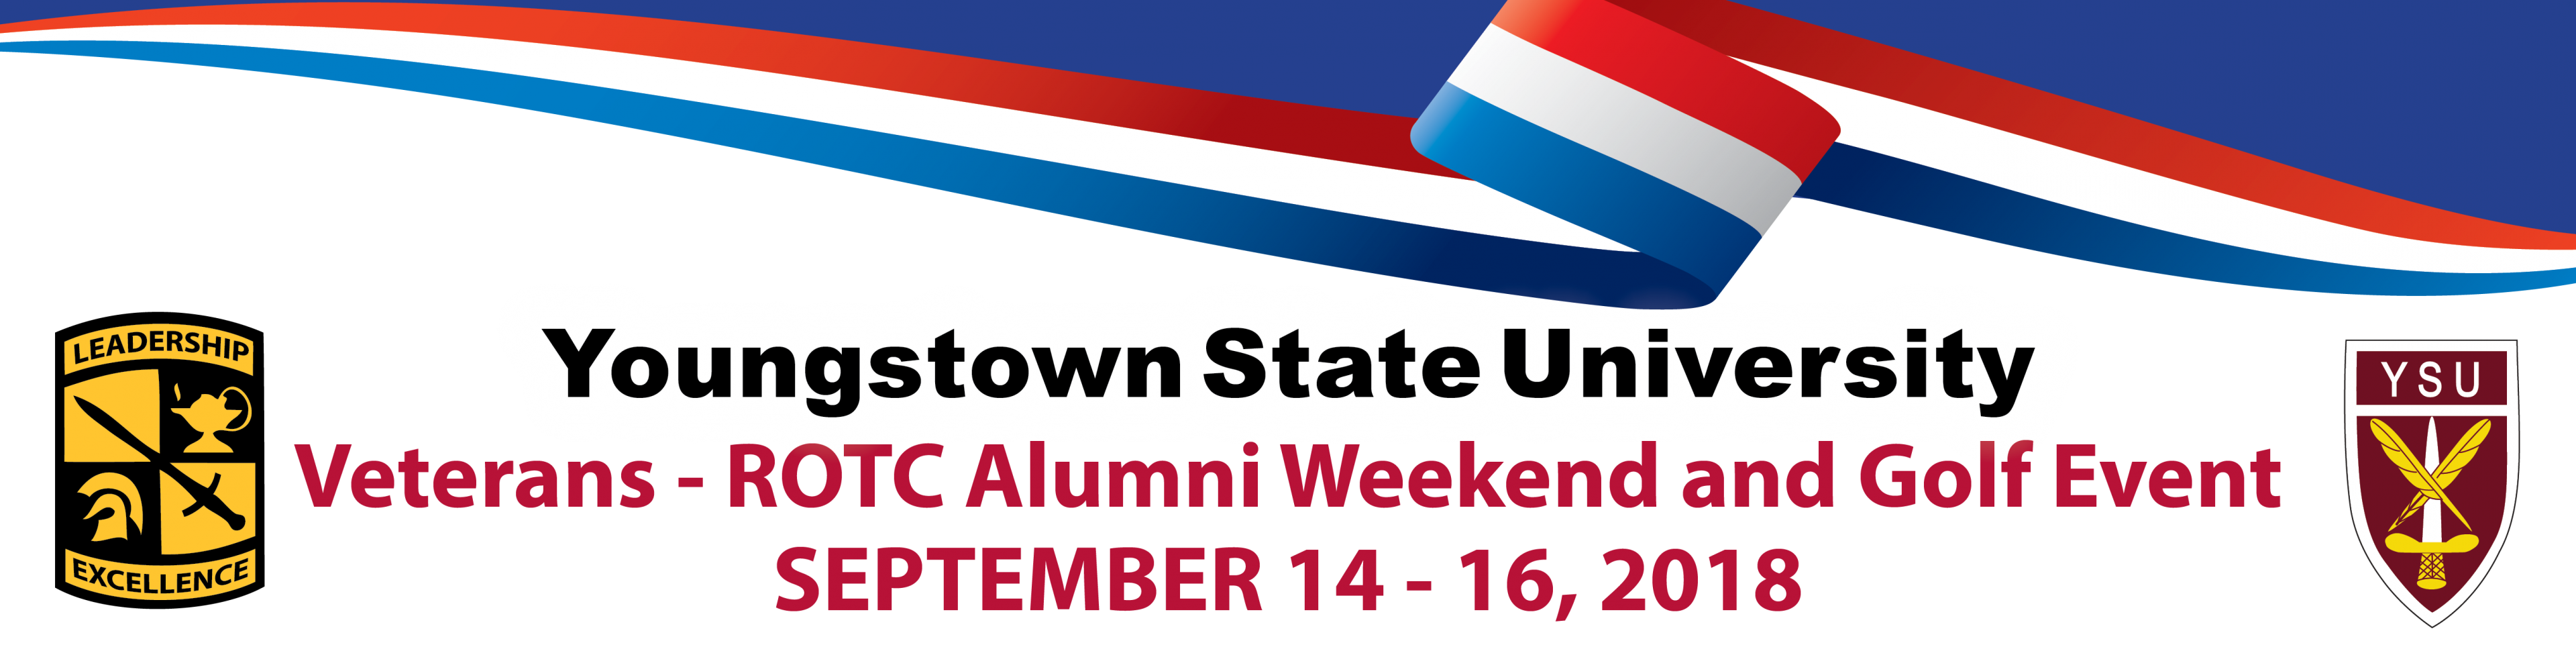 Youngstown State University Veterans - ROTC Alumni Weekend and Golf Outing Septmeber 14-16, 2018 